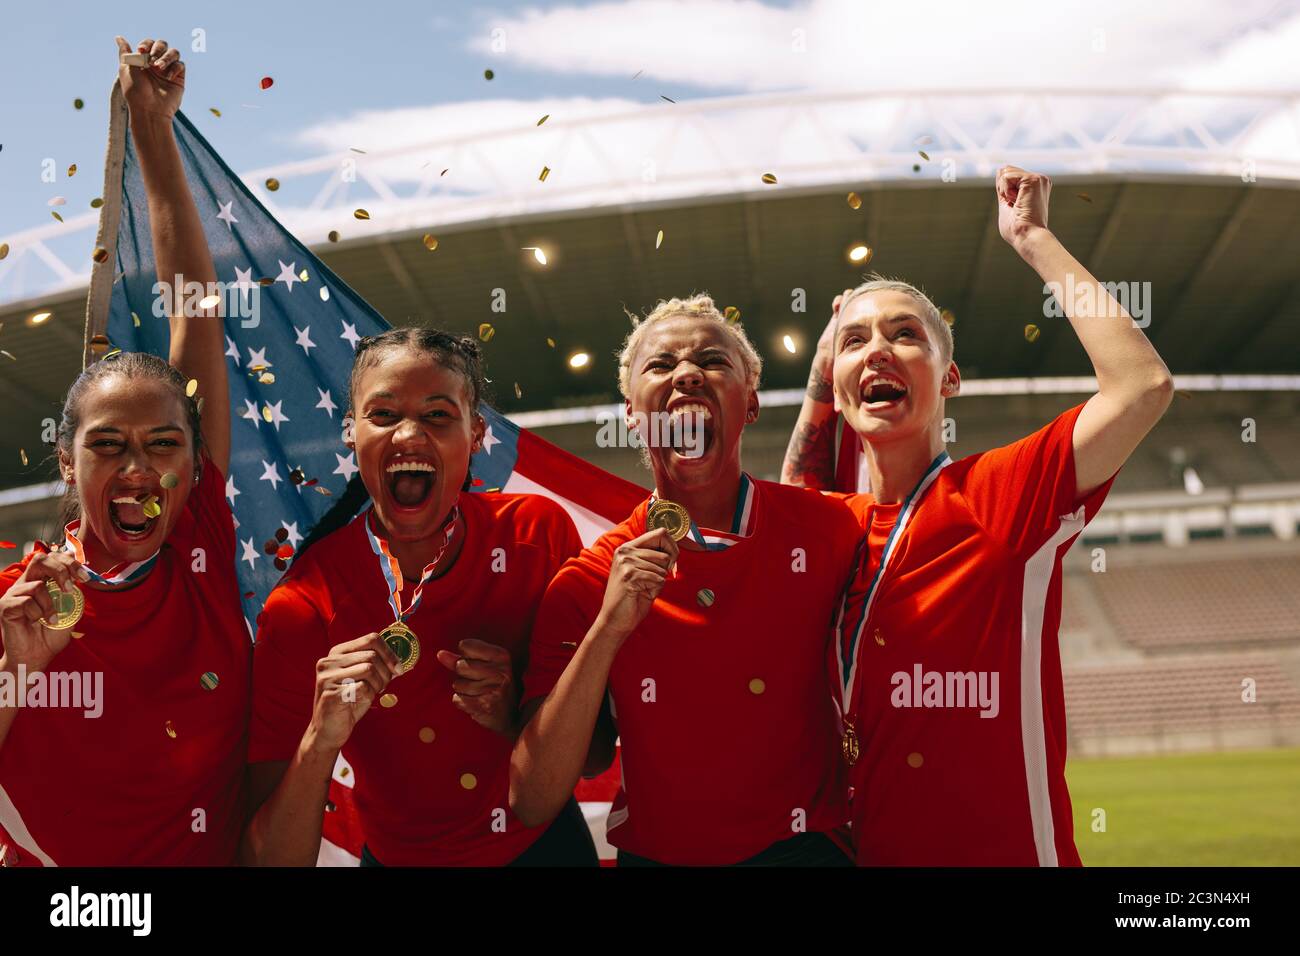 American female football team celebrating championship. Women soccer team screaming on field holding national flag with confetti fall around. Stock Photo